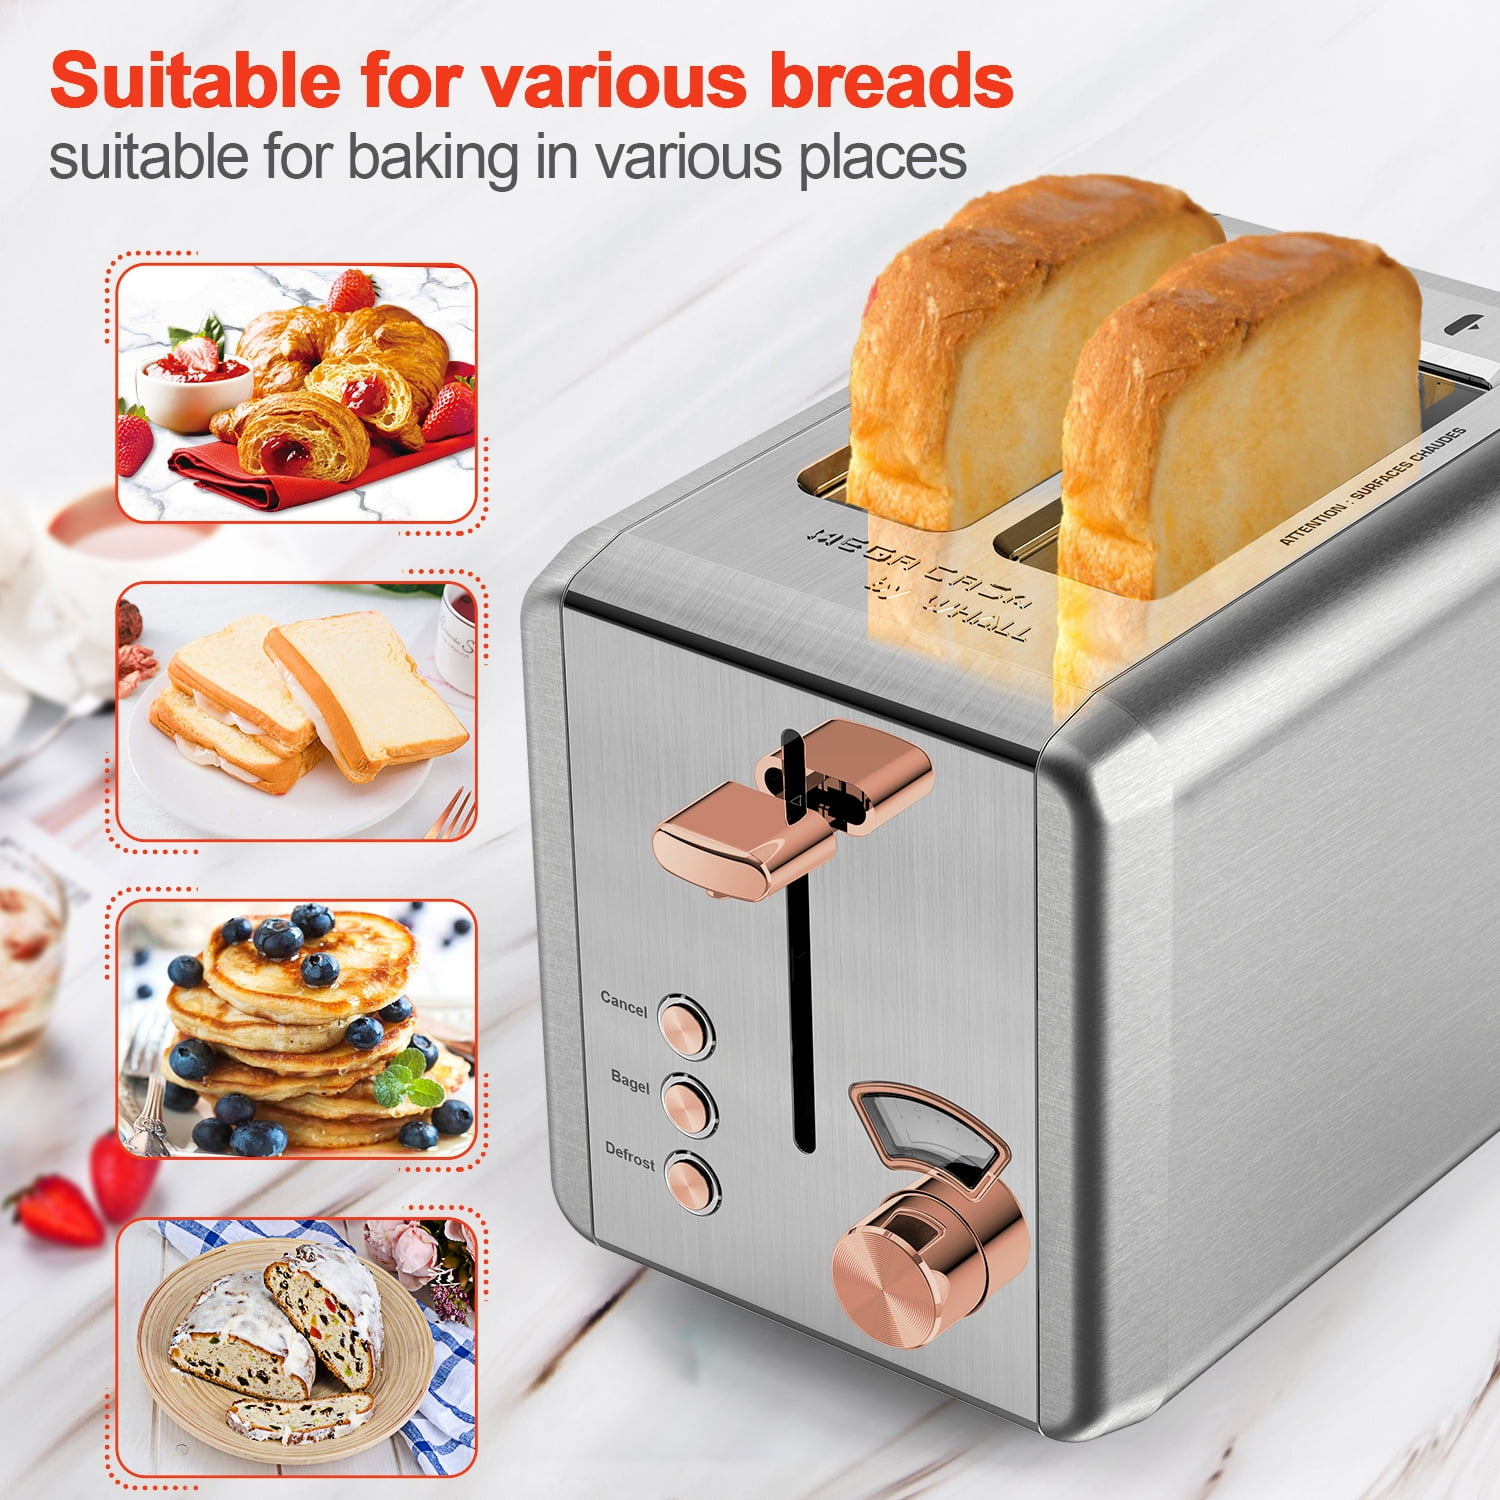  BergHOFF Ouro Gold Stainless Steel 2-Slice Extra Wide Slots  Toaster 850W 6 Shade Settings, Auto Shut-off, Defrost, Cancel, Extra Wide  Slots for Bagels Waffles, Slide-out Crumb Tray: Home & Kitchen